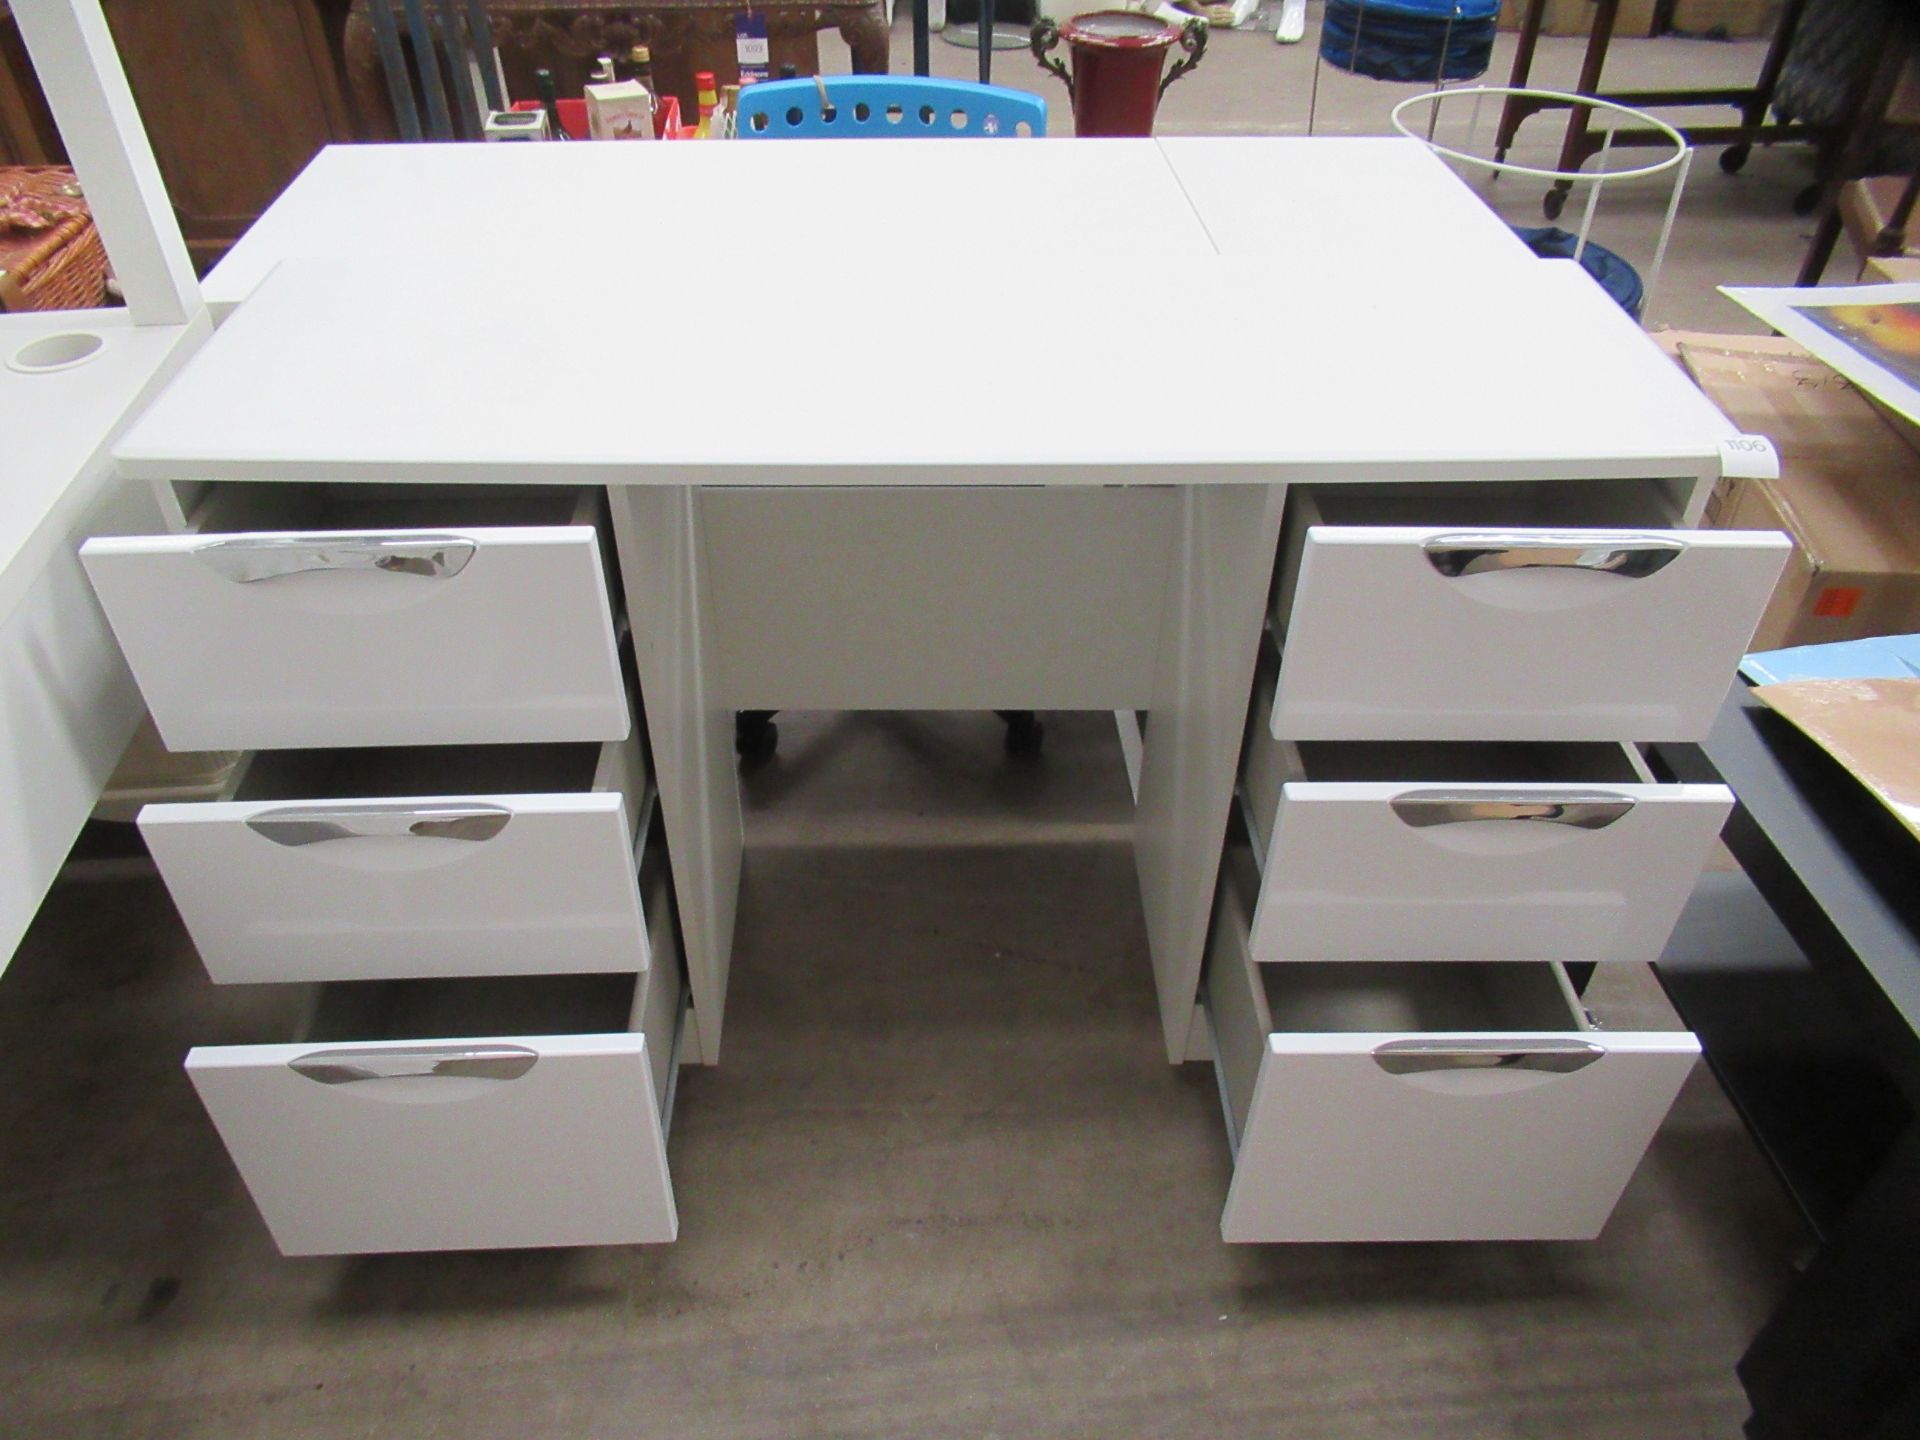 Painted Twin Pedestal Desk with Chrome Handles (128 x 39 x 79cm) - Image 2 of 2